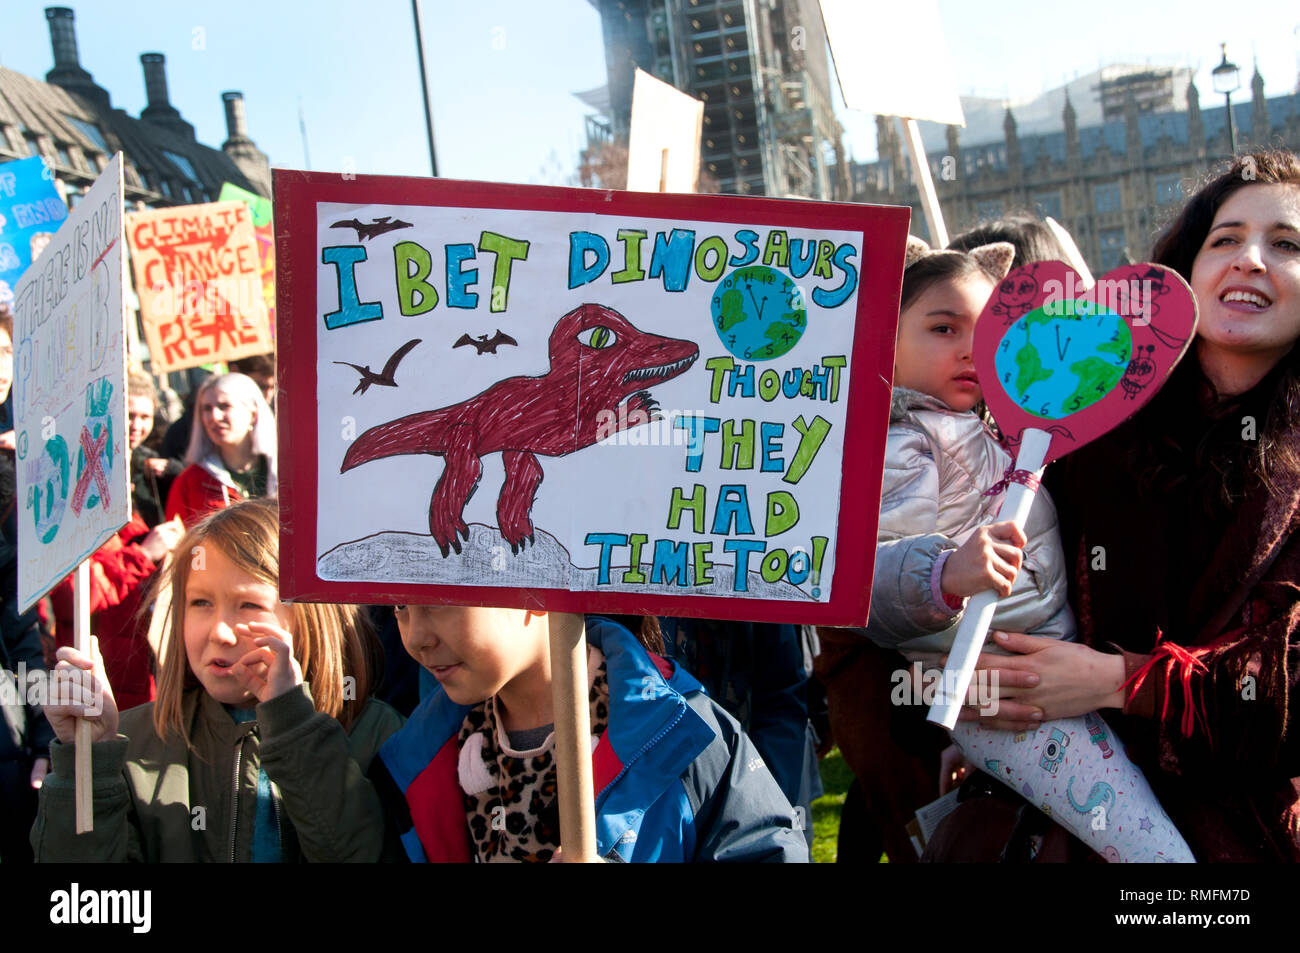 London, UK. 15th Feb, 2019. Thousands of schoolchildren and young people in the UK have taken part in climate strikes, walking out of school to protest at government inaction on climate change as part of a global campaign for action on climate change.The school strikes have been inspired by young Swedish activist Greta Thurnberg who since August 2018 has been protesting on Fridays. In London several thousands children and students gathered in Parliament Square, Westminster. A young boy holds a sign saying 'I bet  dinosaurs thought they had time too'. Credit: Jenny Matthews/Alamy Live News Stock Photo